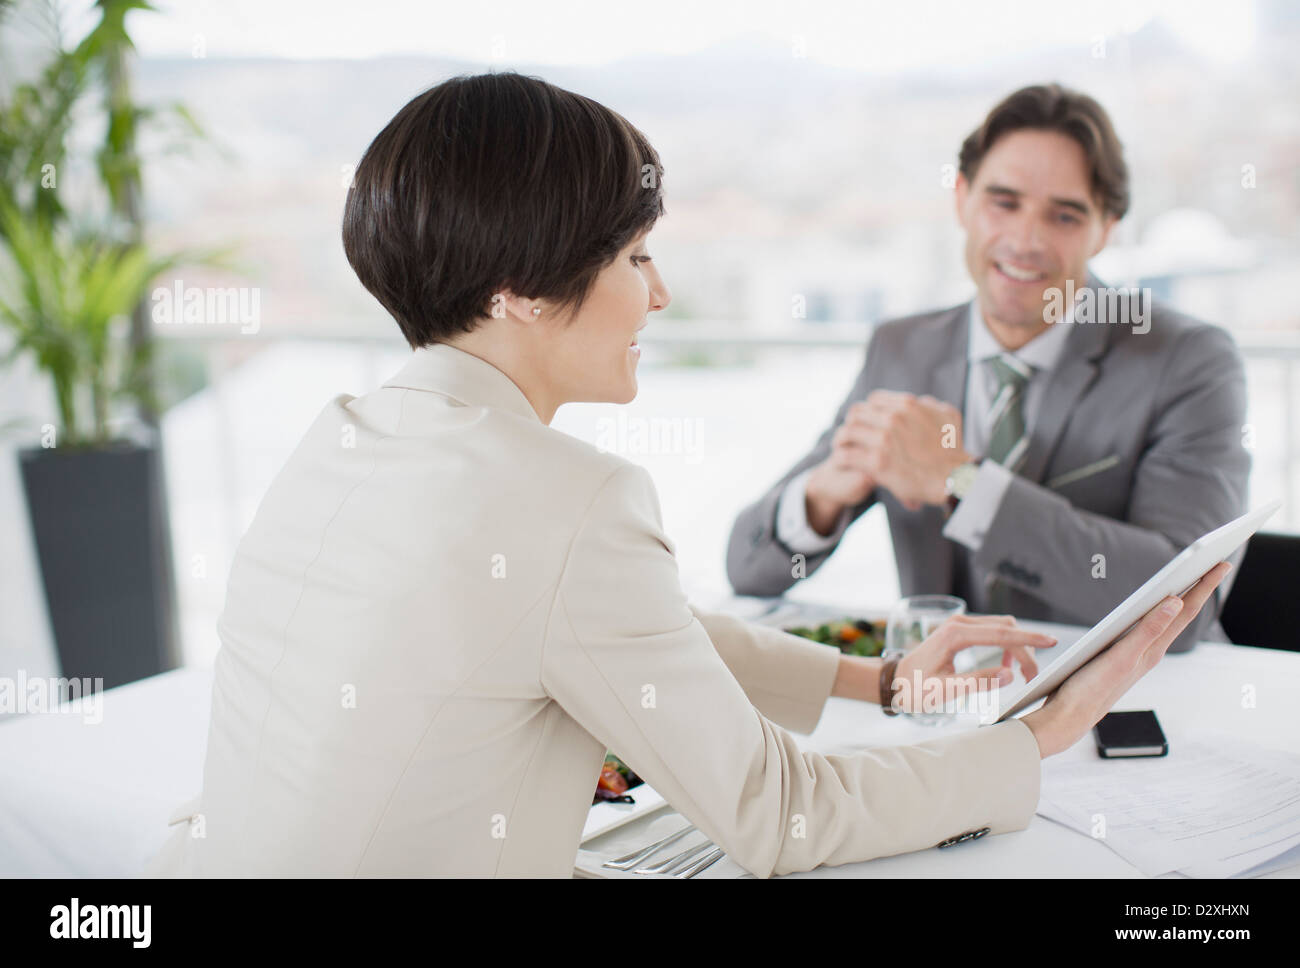 Businessman and businesswoman using digital tablet at restaurant table Stock Photo